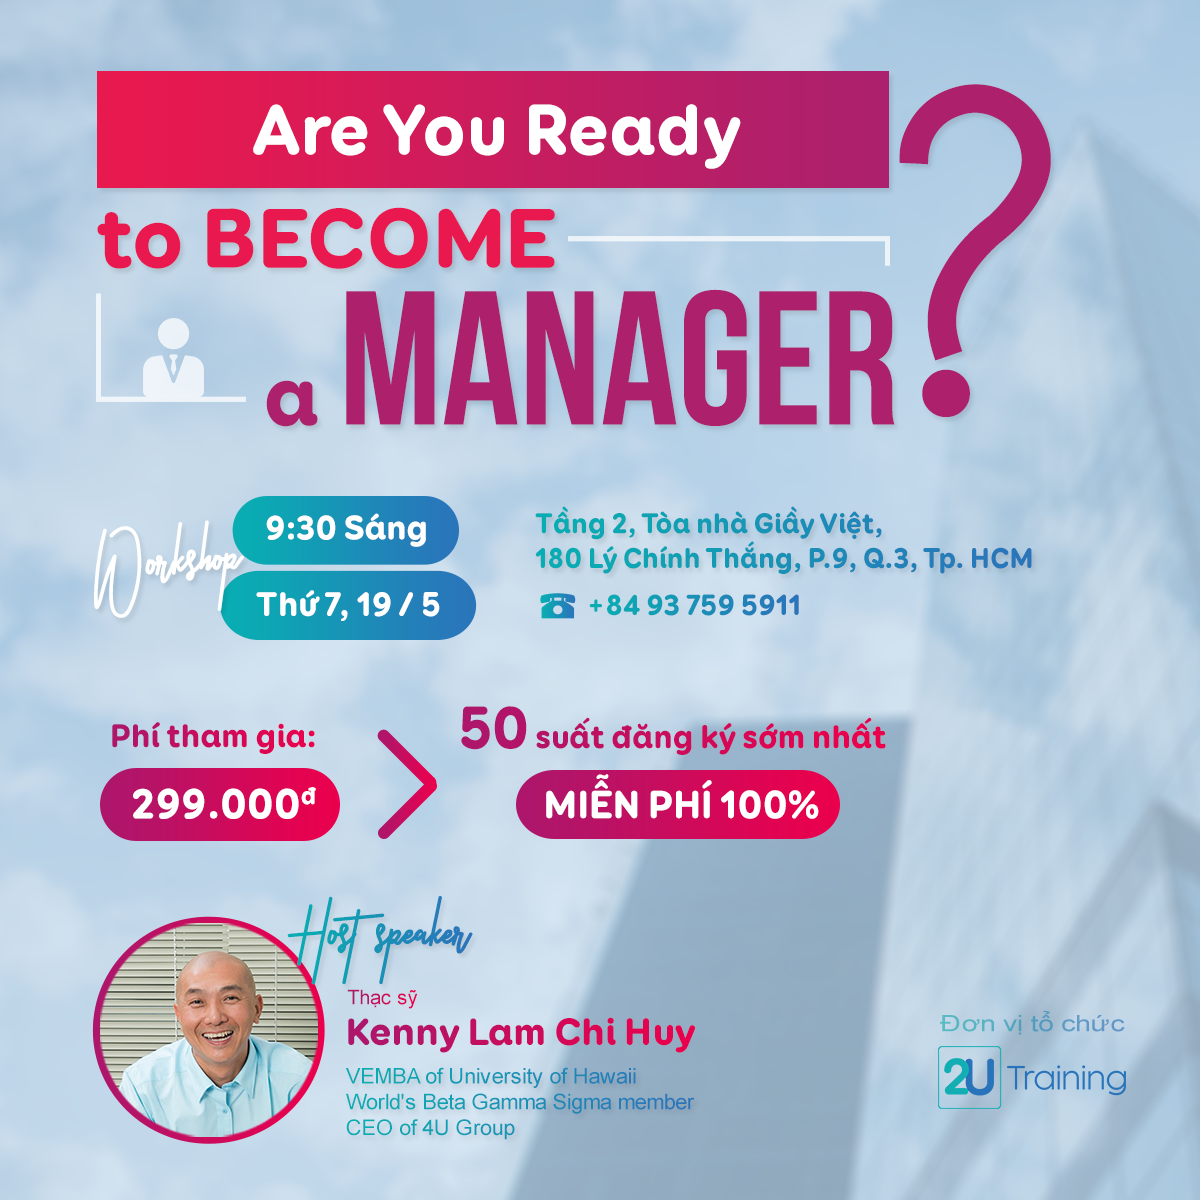 Are You Ready to BECOME a MANAGER?